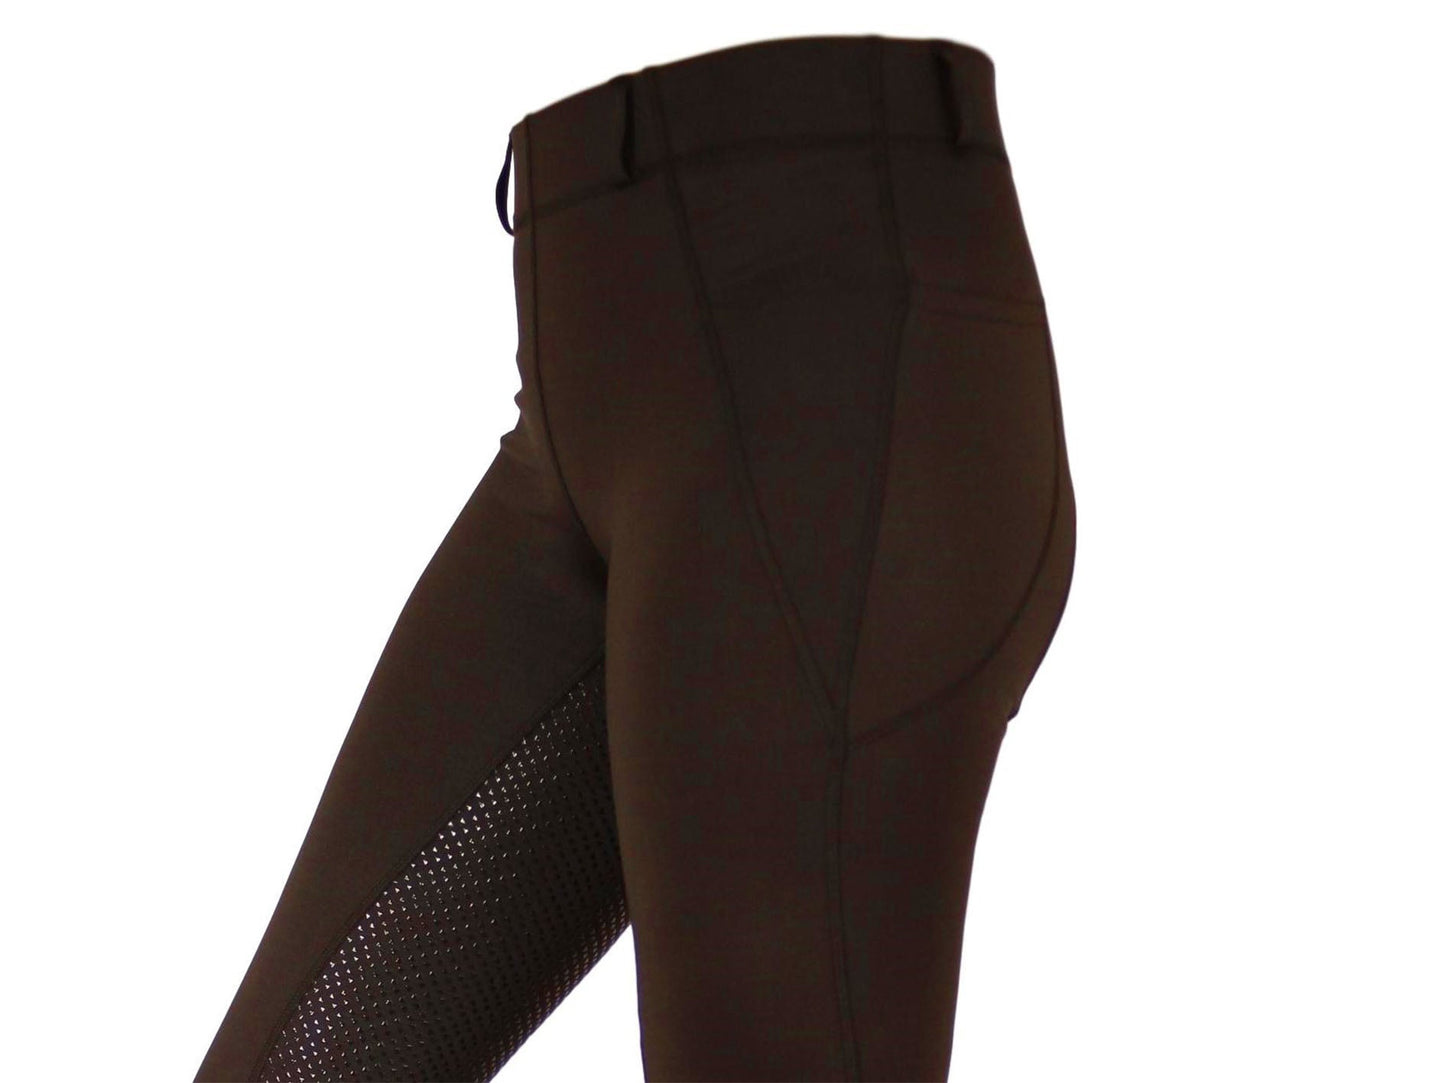 Brown horse riding tights with mesh detail, close-up side view.